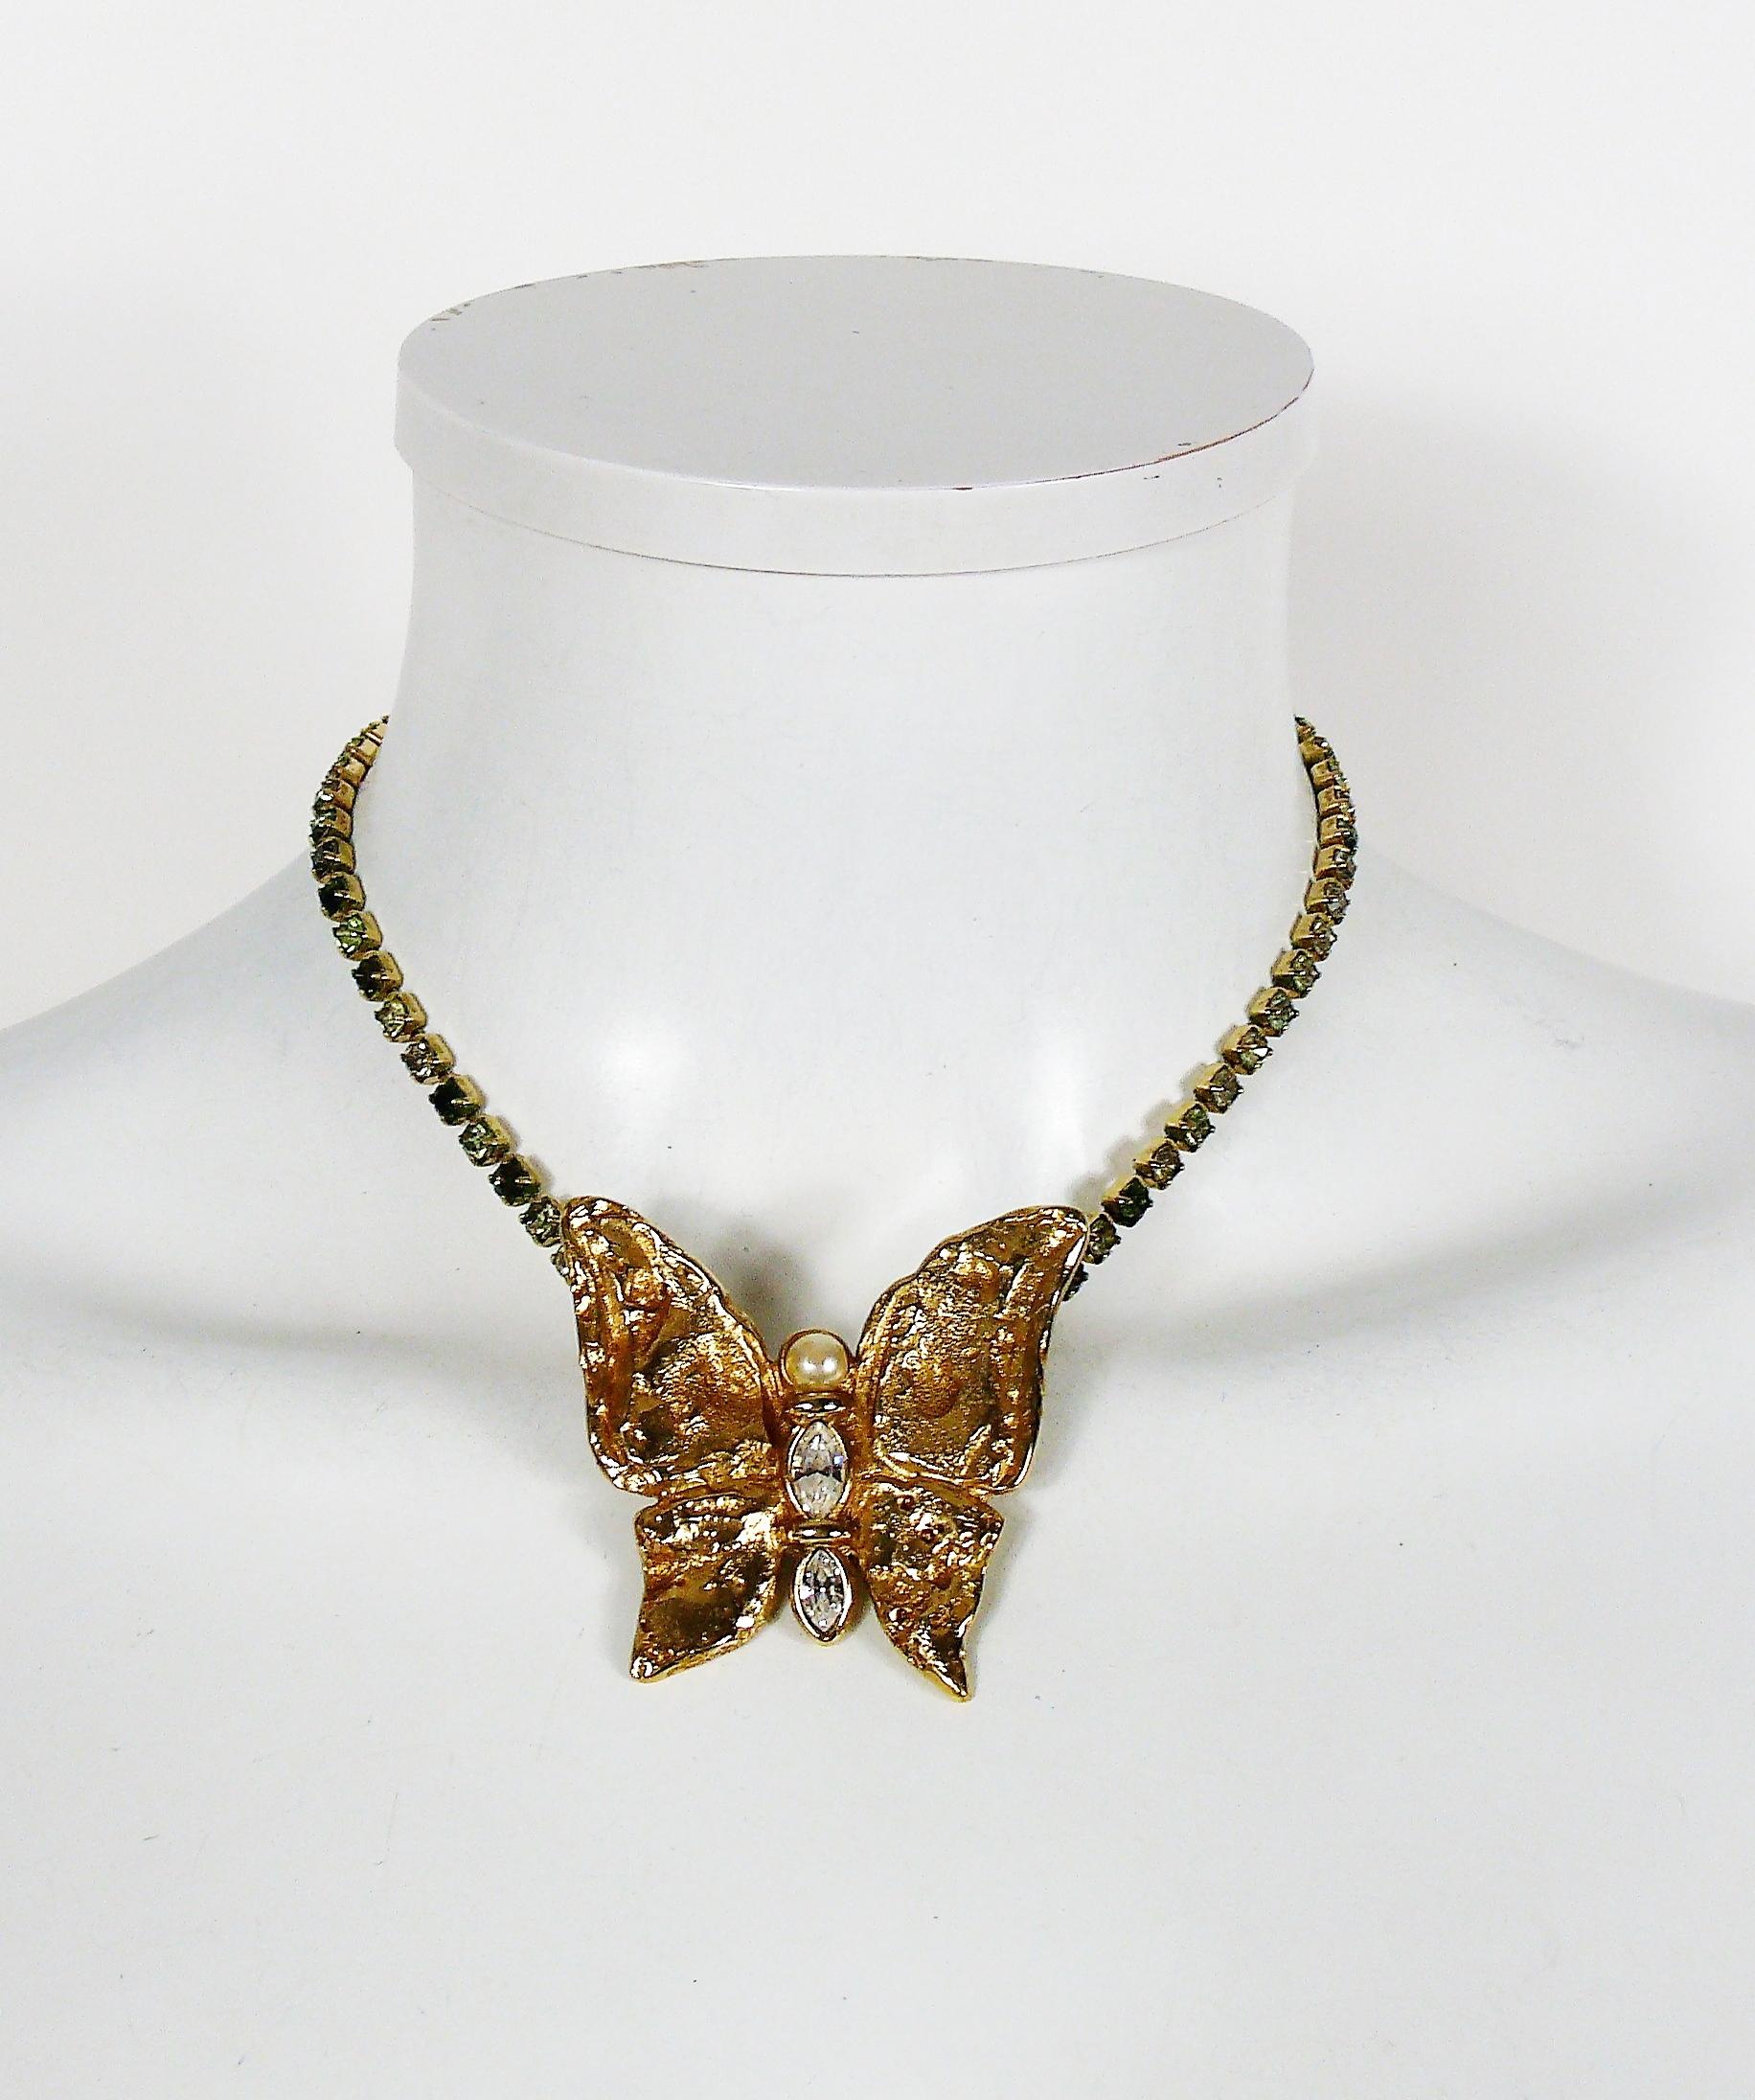 YVES SAINT LAURENT vintage textured gold toned butterfly necklace embellished with crystals and faux pearl.

Embossed YSL Made in France.

Indicative measurements : length approx. 39.5 cm (15.55 inches) / butterfly max. height approx. 4.8 cm (1.89